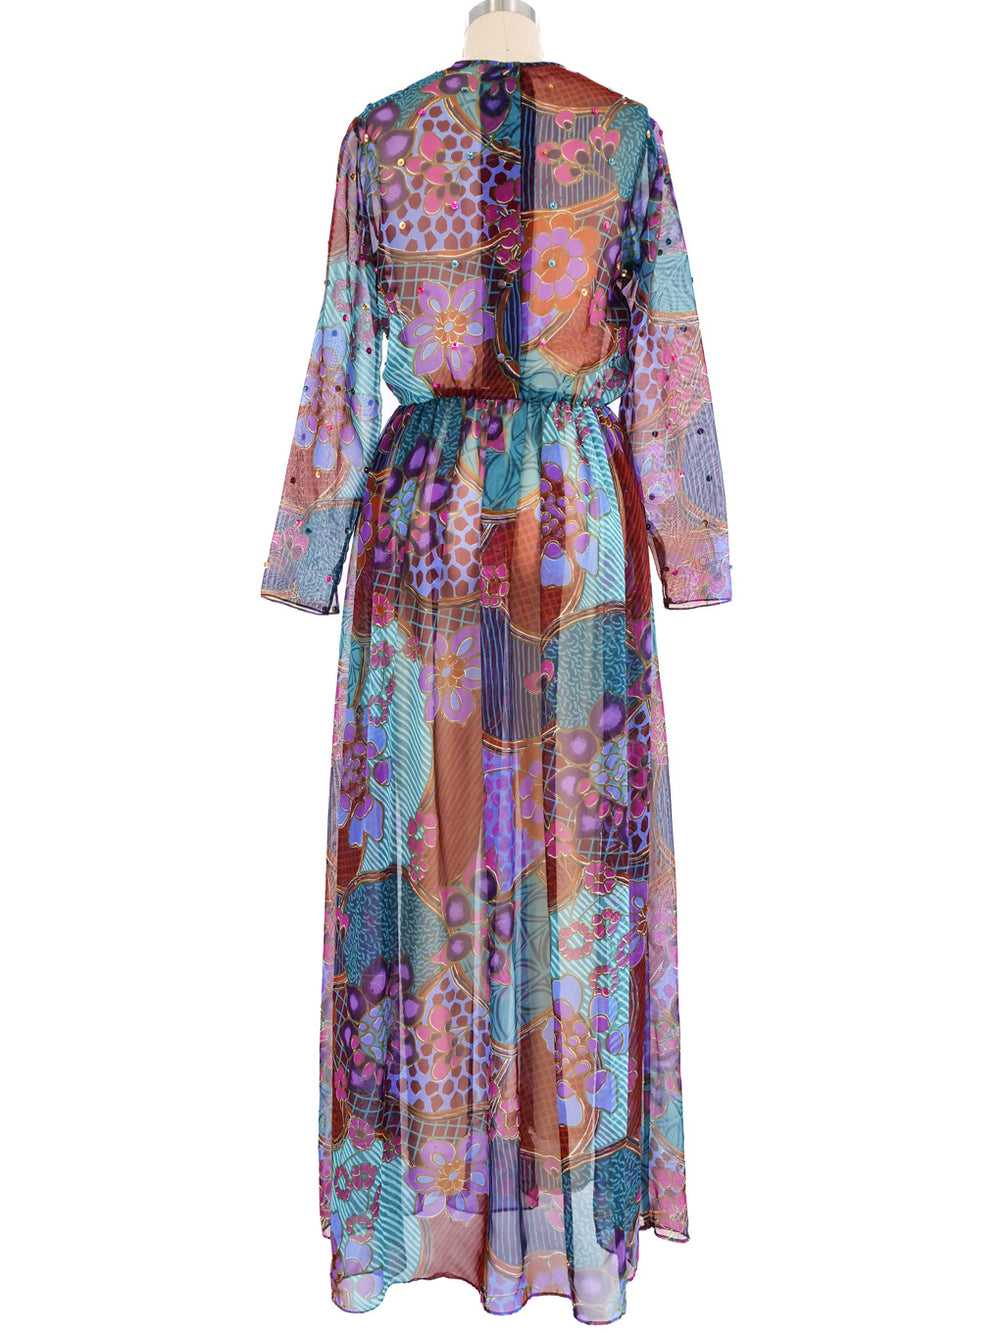 Sequined Floral Print Sheer Maxi Dress - image 4